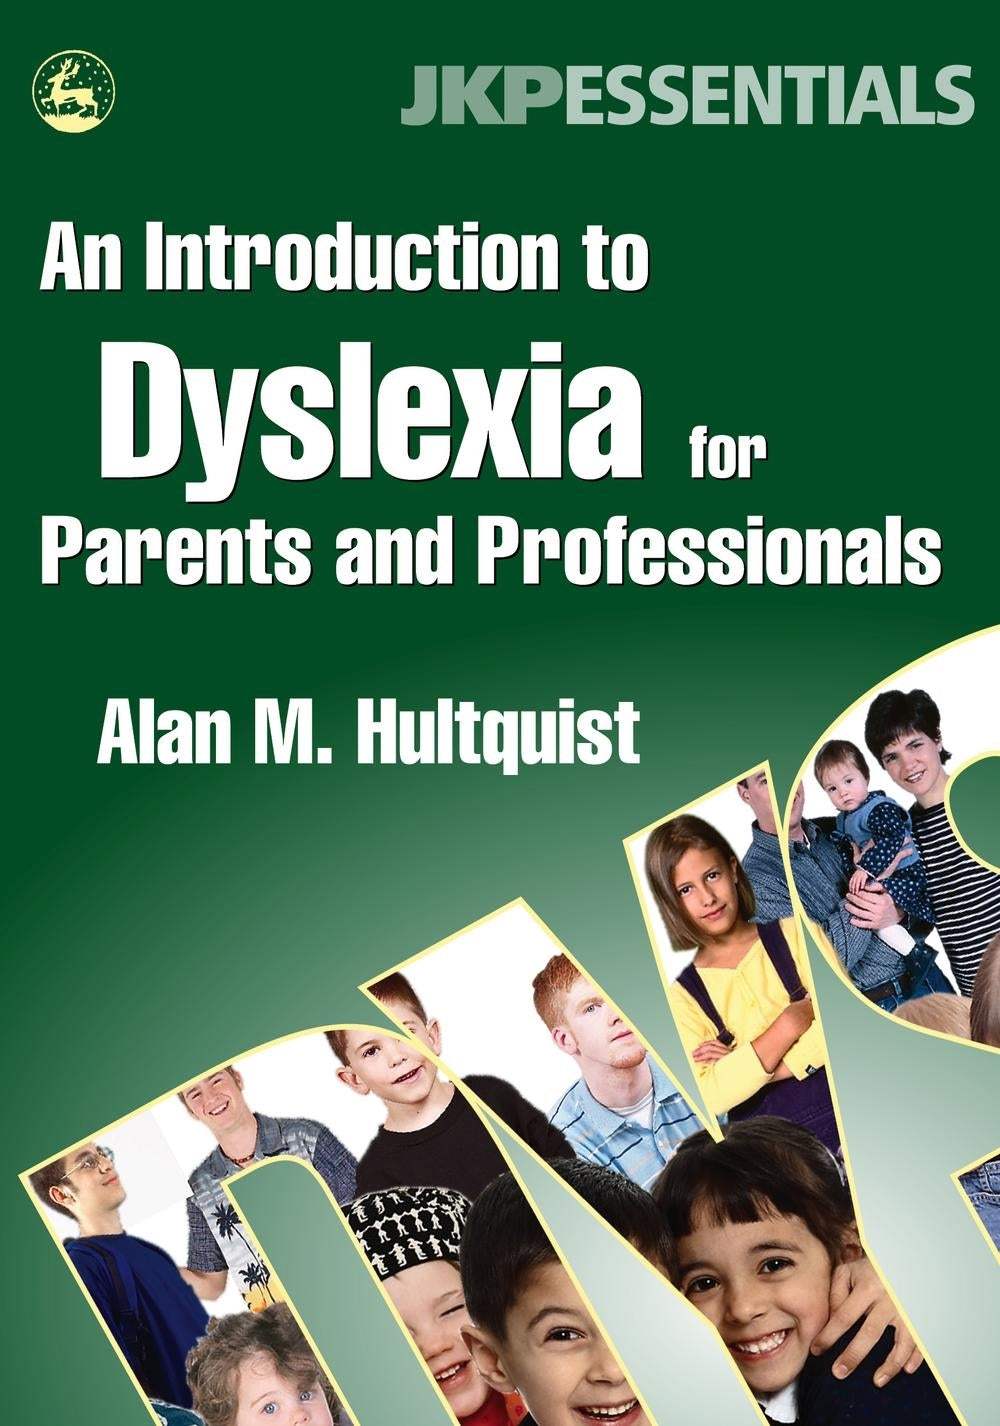 An Introduction to Dyslexia for Parents and Professionals by Alan M. Hultquist